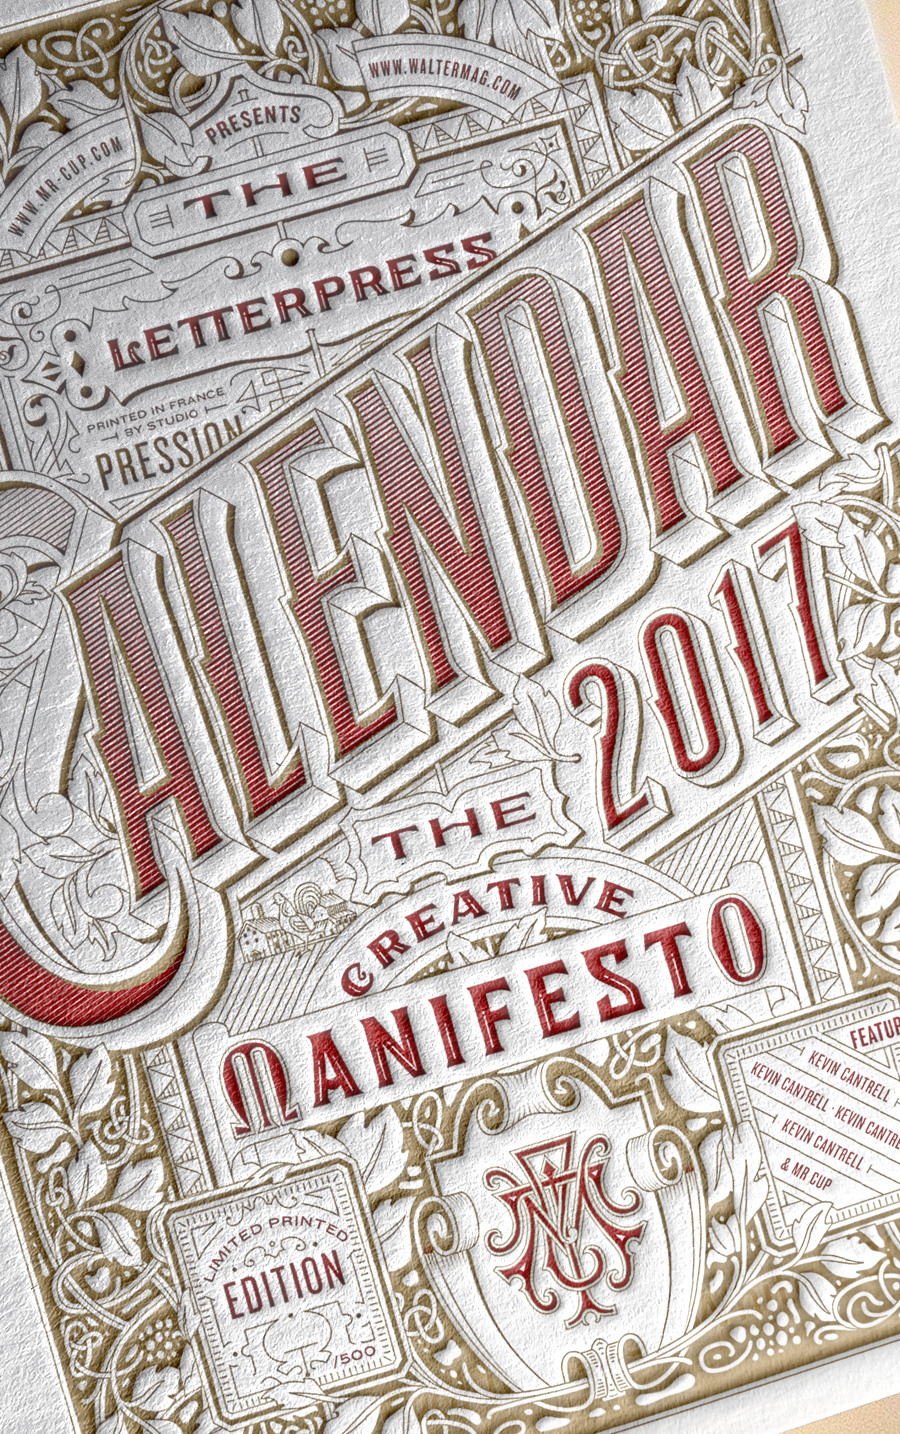 Mr Cup 2017 letterpress calendar design by Kevin Cantrell